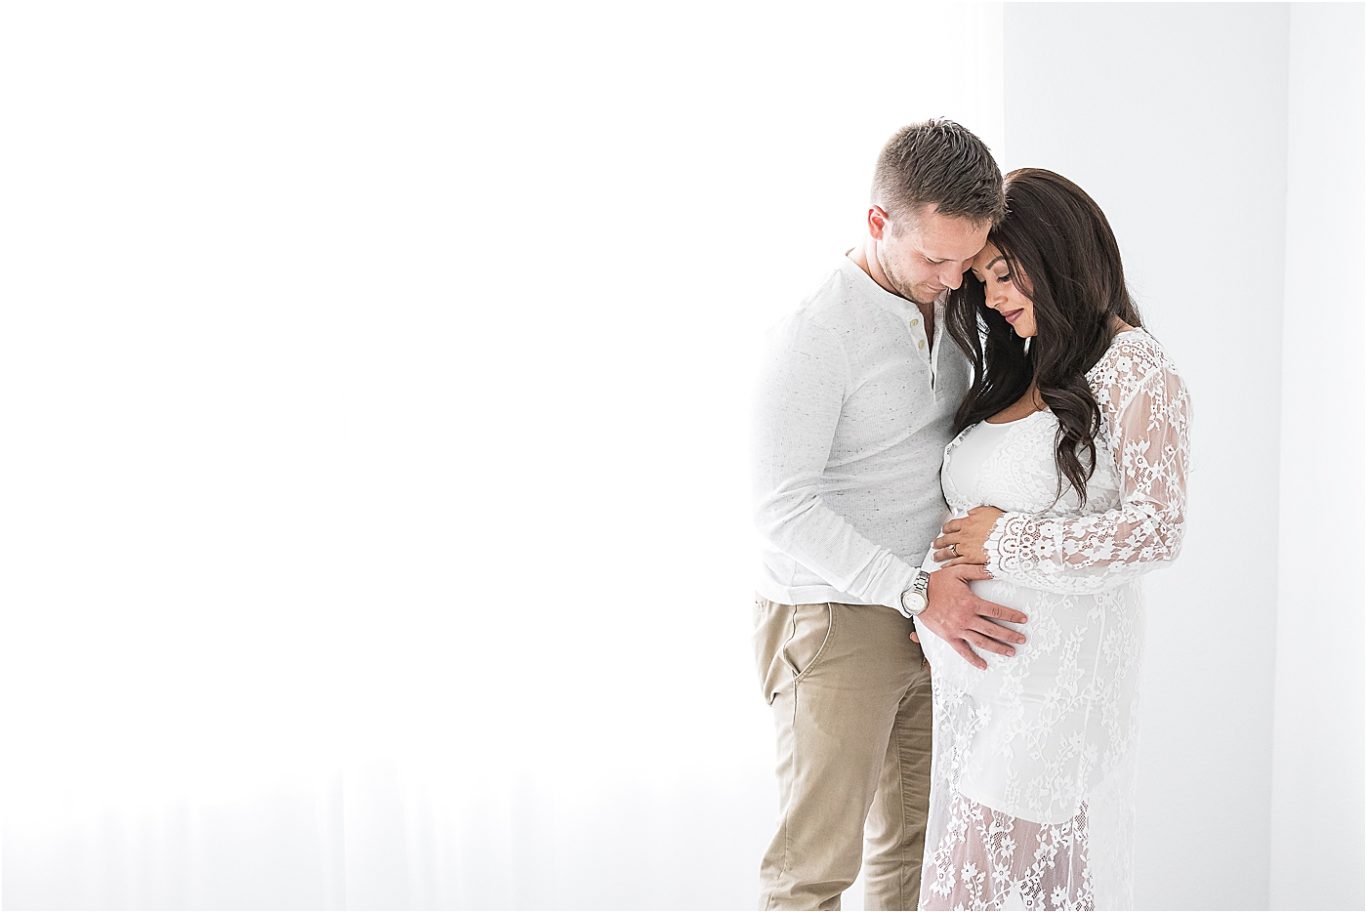 Studio maternity session in Fishers Indiana with Lindsay Konopa Photography.